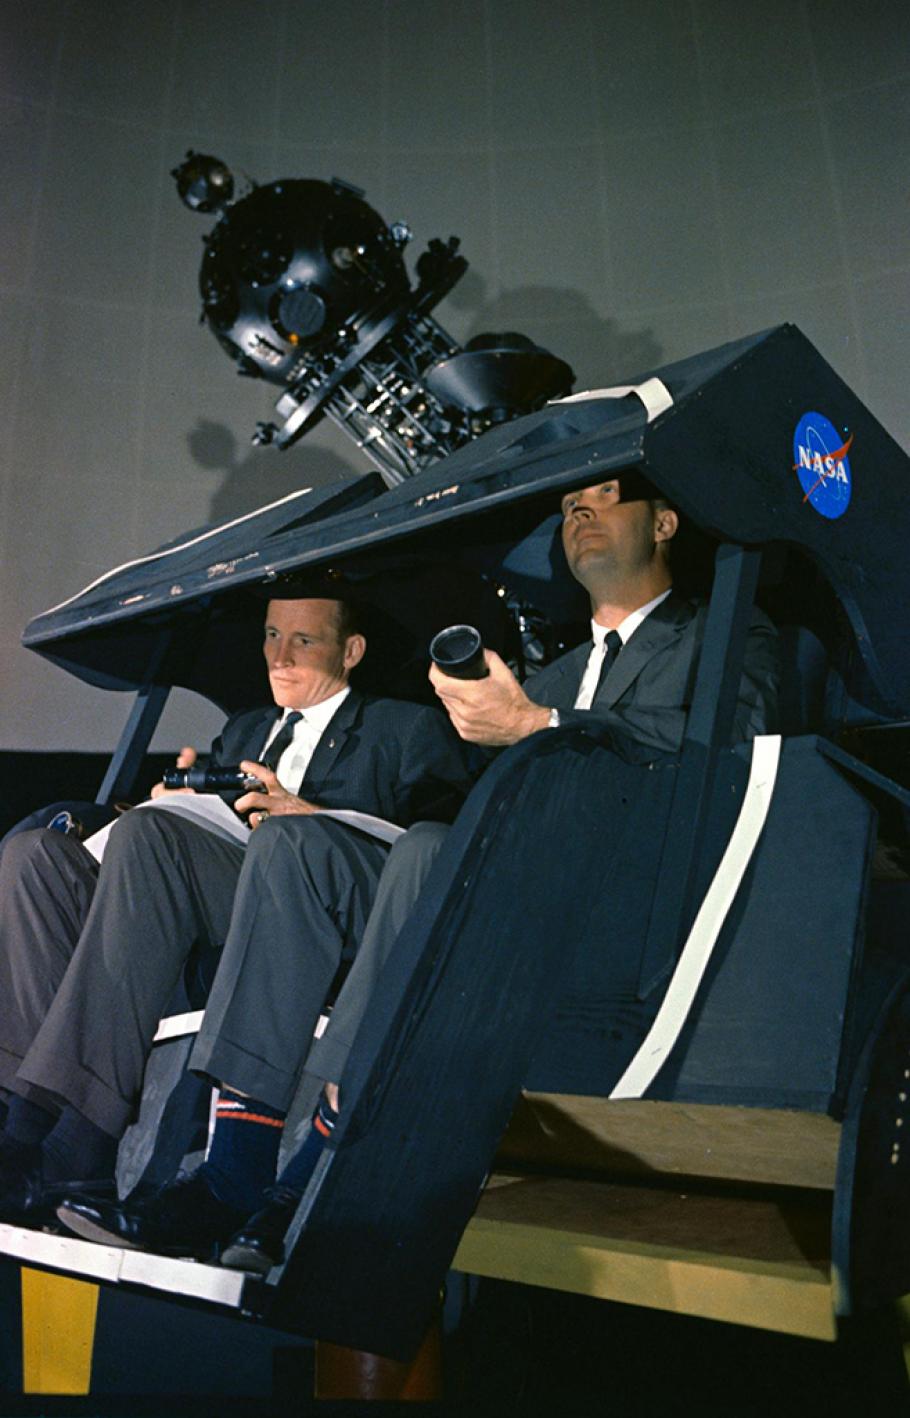 Two men sitting in a simulation training device that is enclosed overhead but open in the front